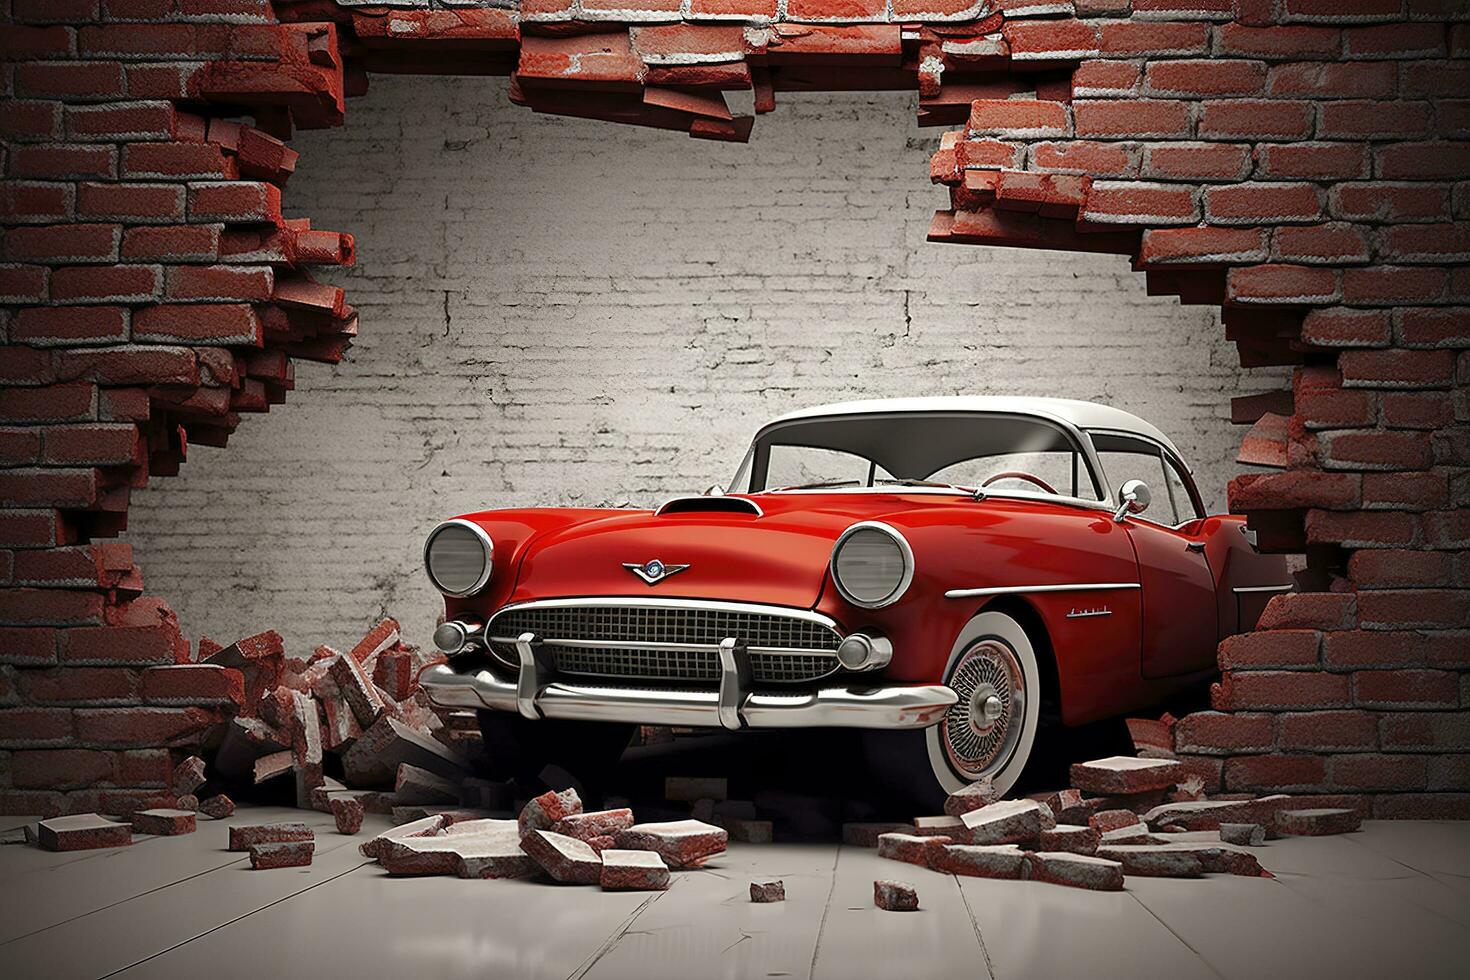 3d mural wallpaper broken wall bricks and a classic red car. world map in a colored background. for Childrens and kids bed room wallpaper, generate ai photo